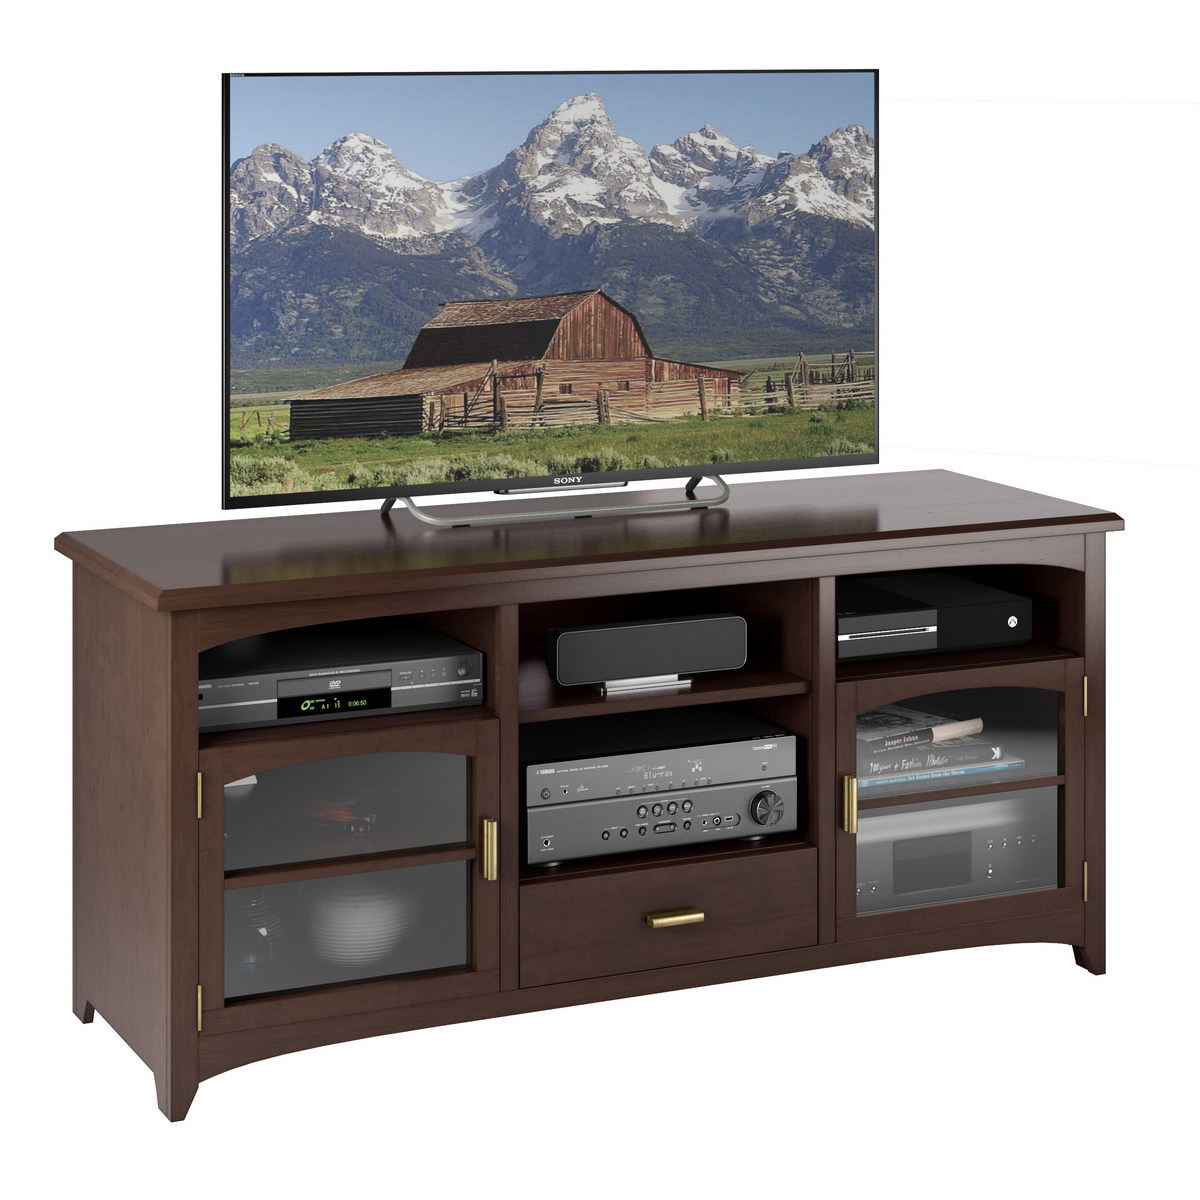 Corliving Tpp Carson Dark Espresso Wood Veneer Tv Bench Tvs Up To Product Picture